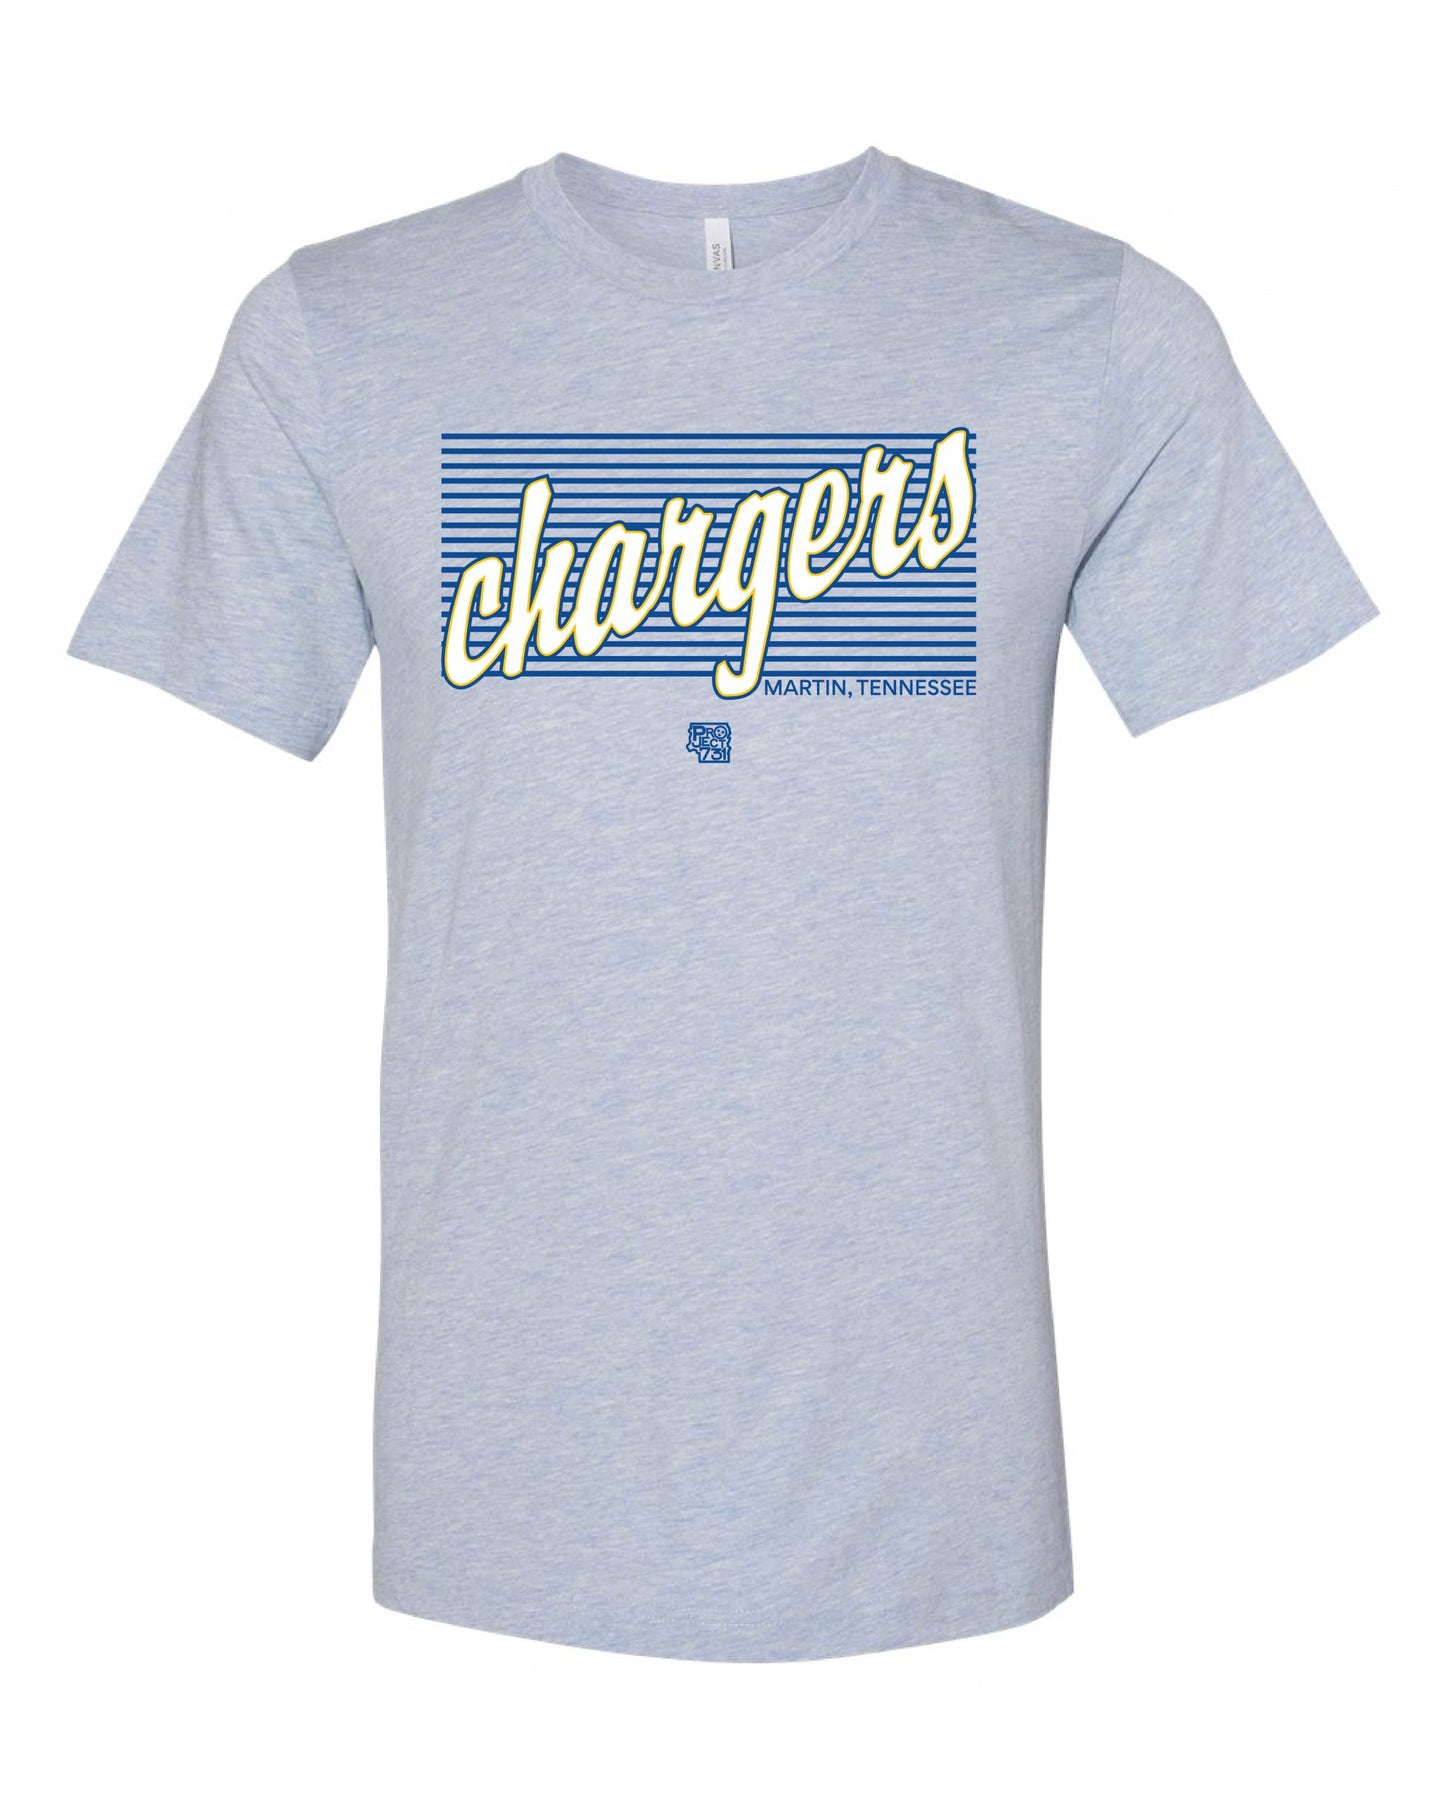 Chargers Lines T-shirt